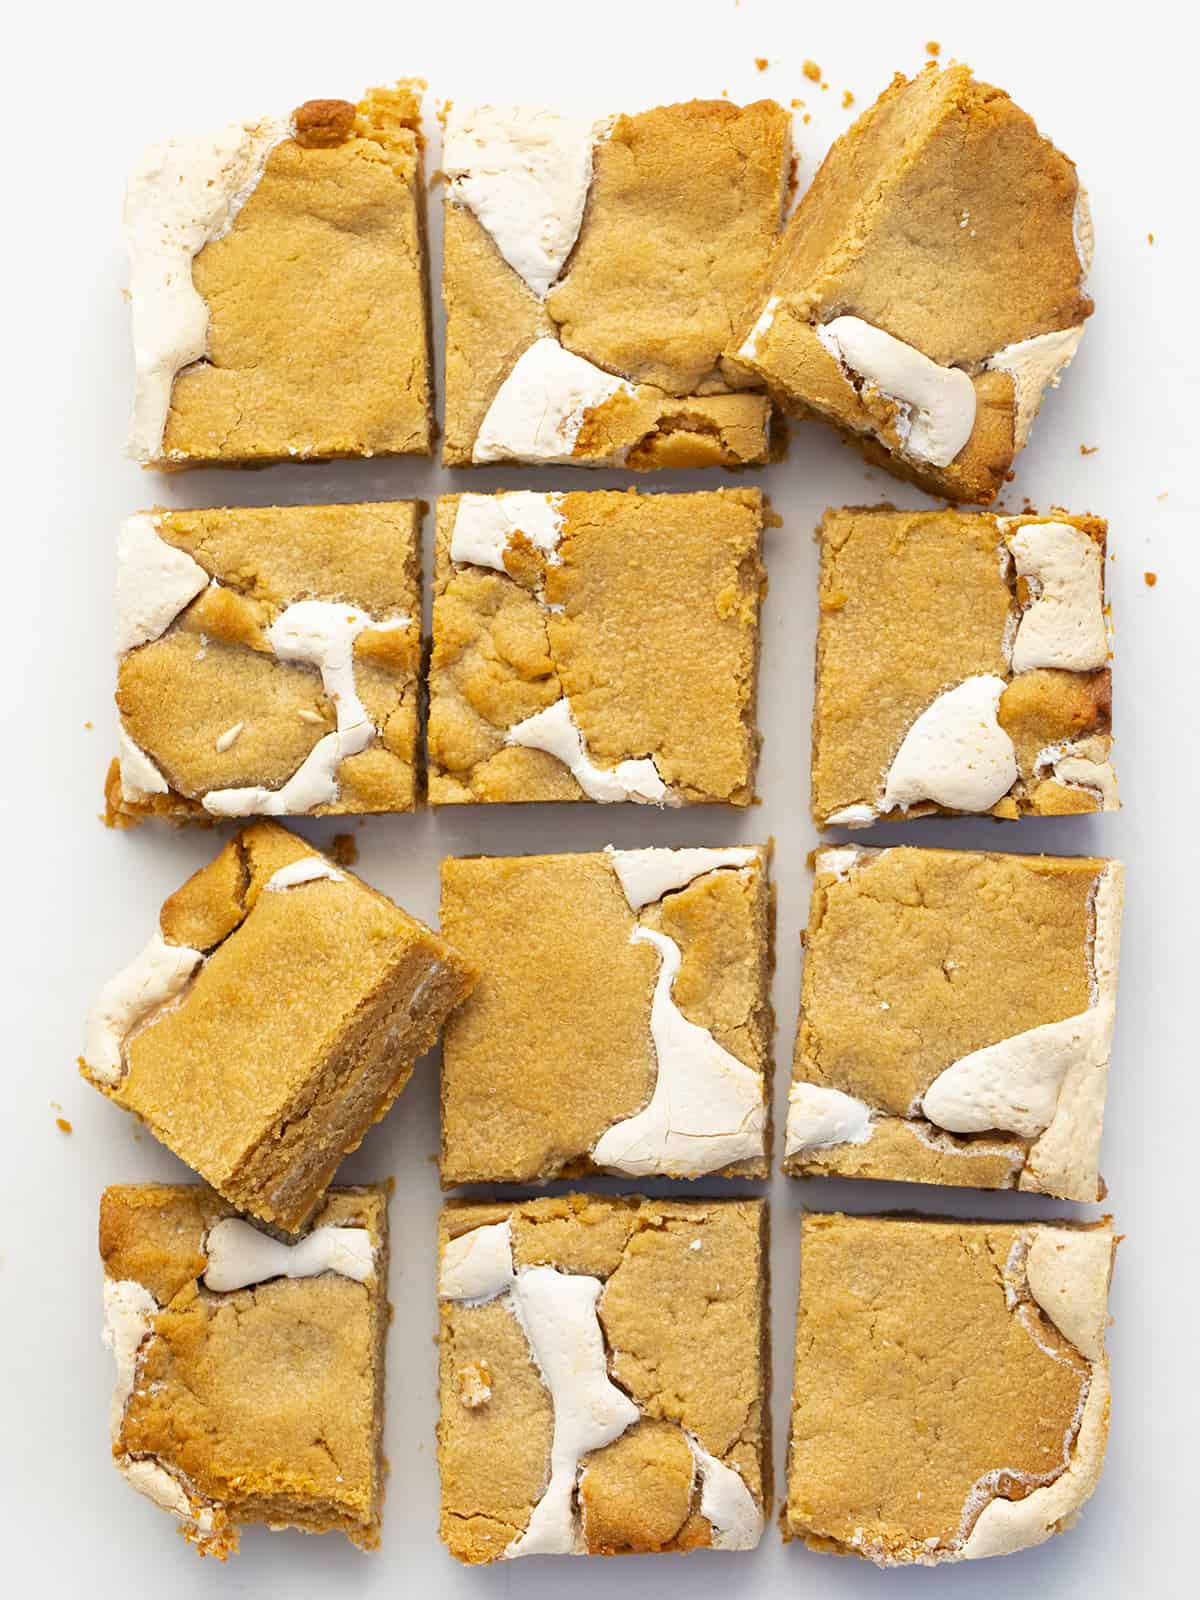 Fluffernutter Bars from Overhead Showing the Marshmallow that Spilled Up Over the Peanut Butter Bar.